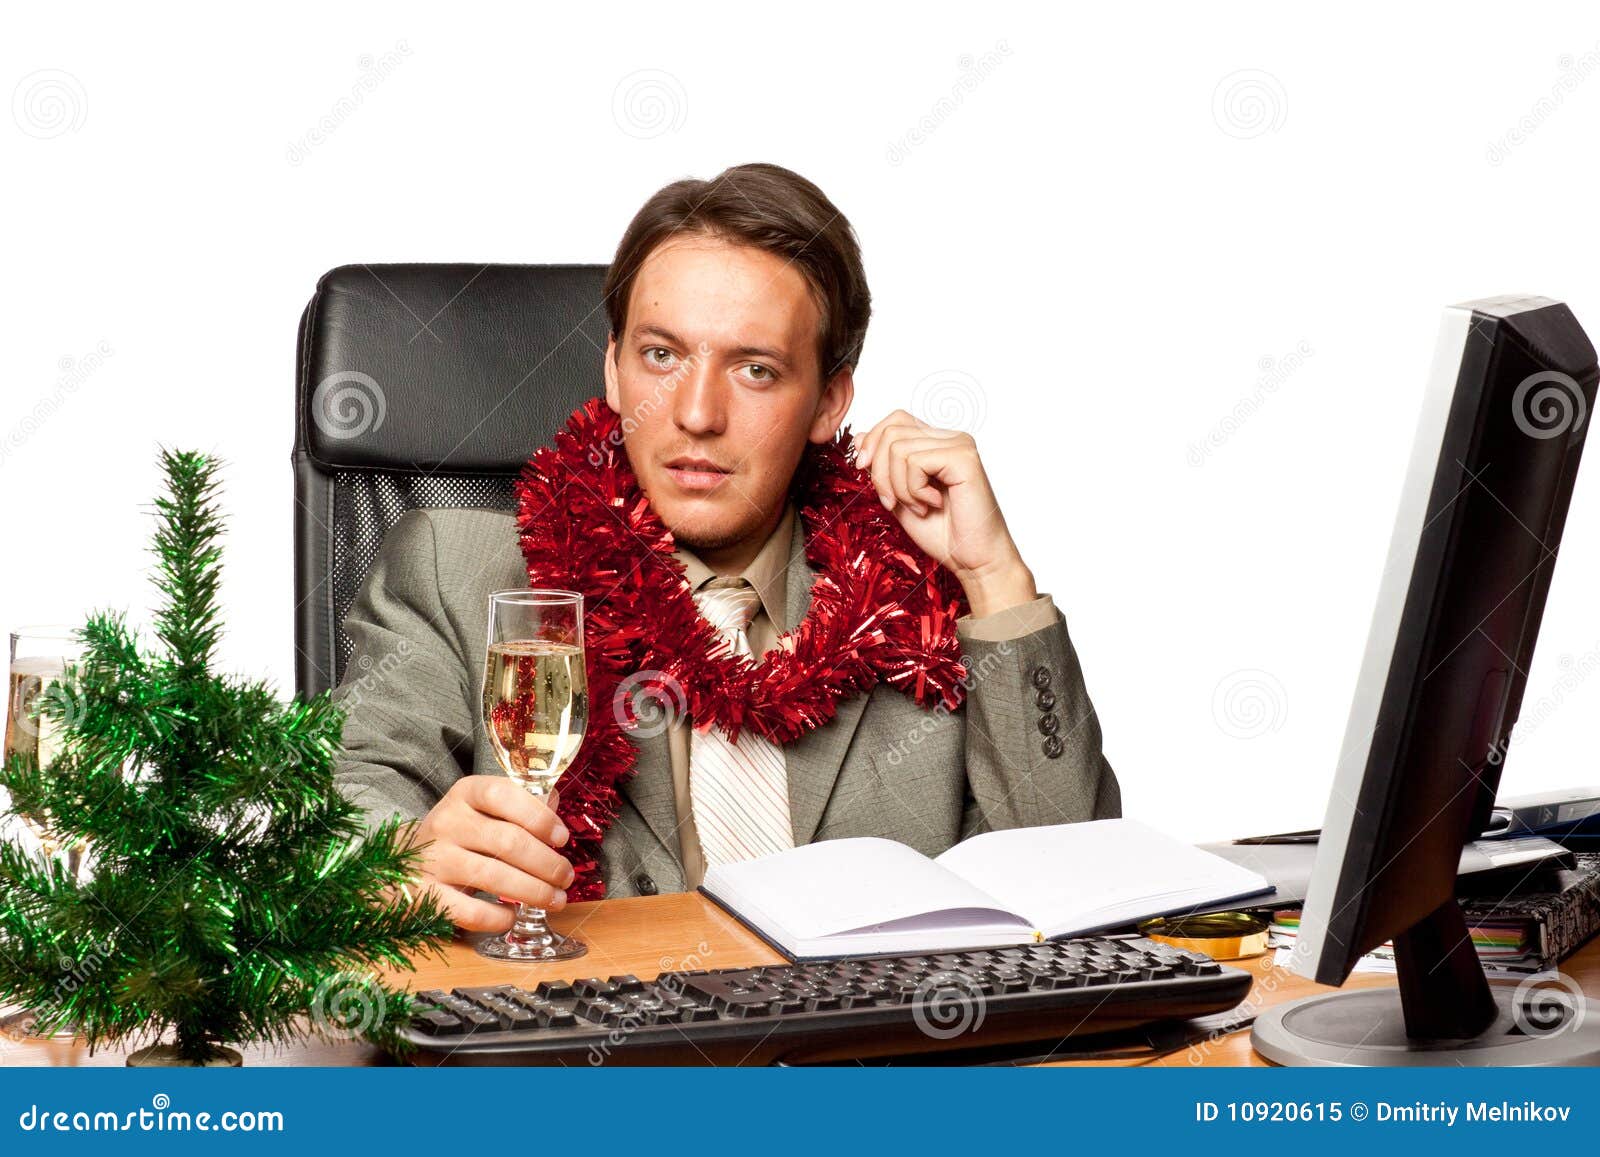 Christmas In The Office Royalty Free Stock Photo - Image 